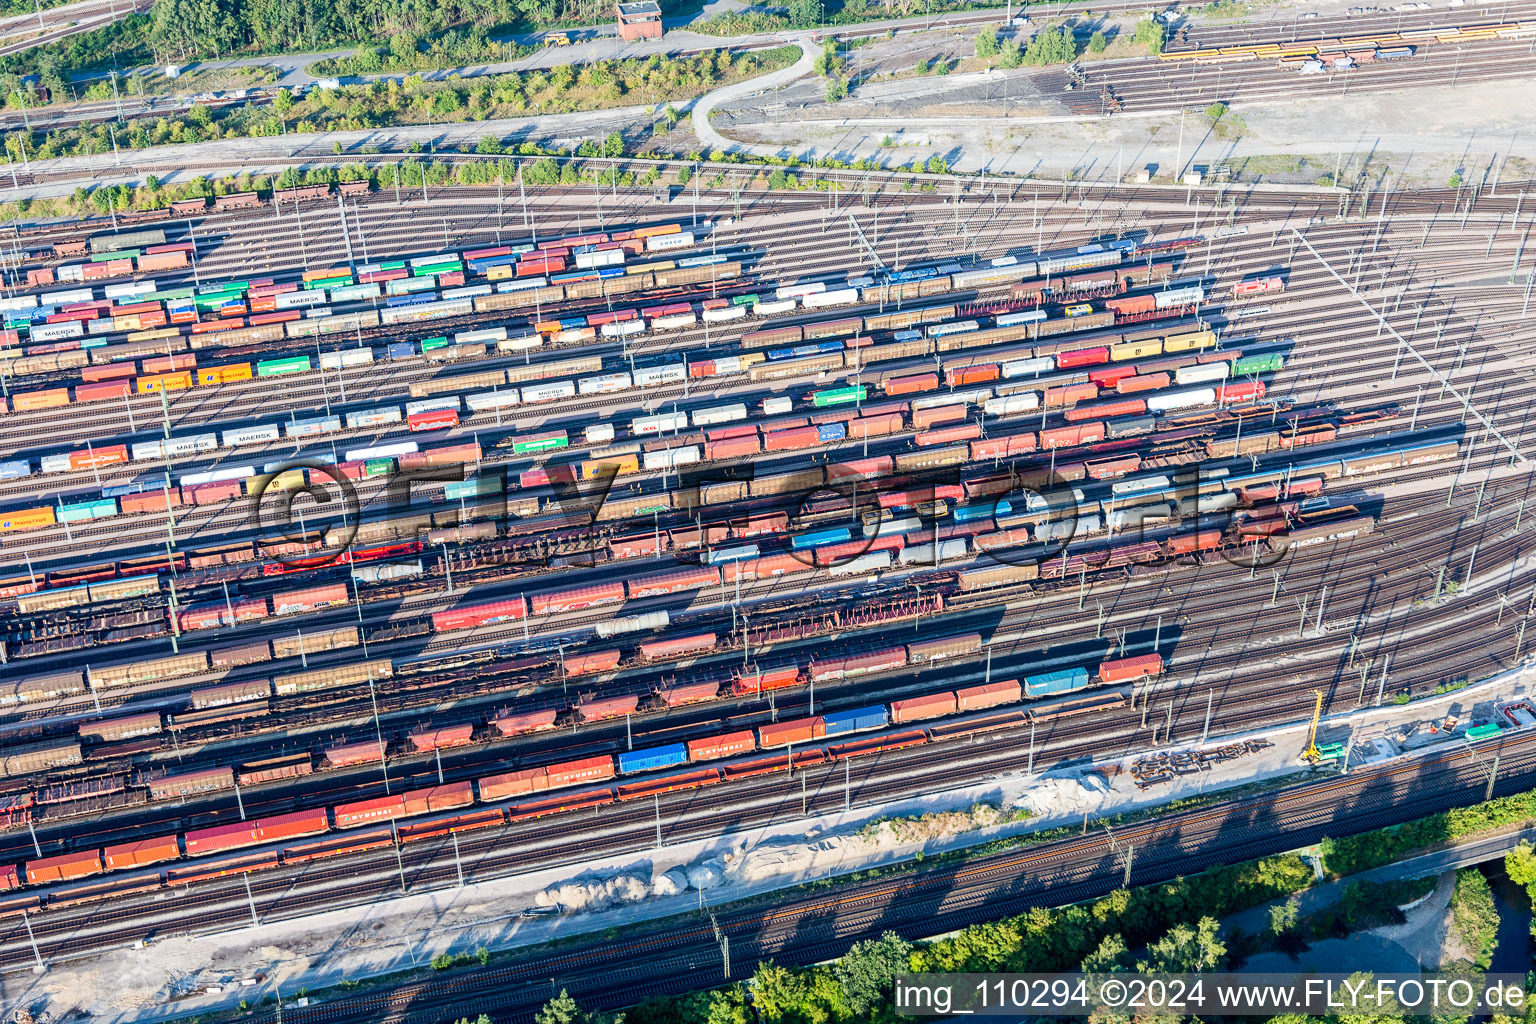 Marshalling yard and freight station Maschen of the Deutsche Bahn in the district Maschen in Seevetal in the state Lower Saxony, Germany seen from above